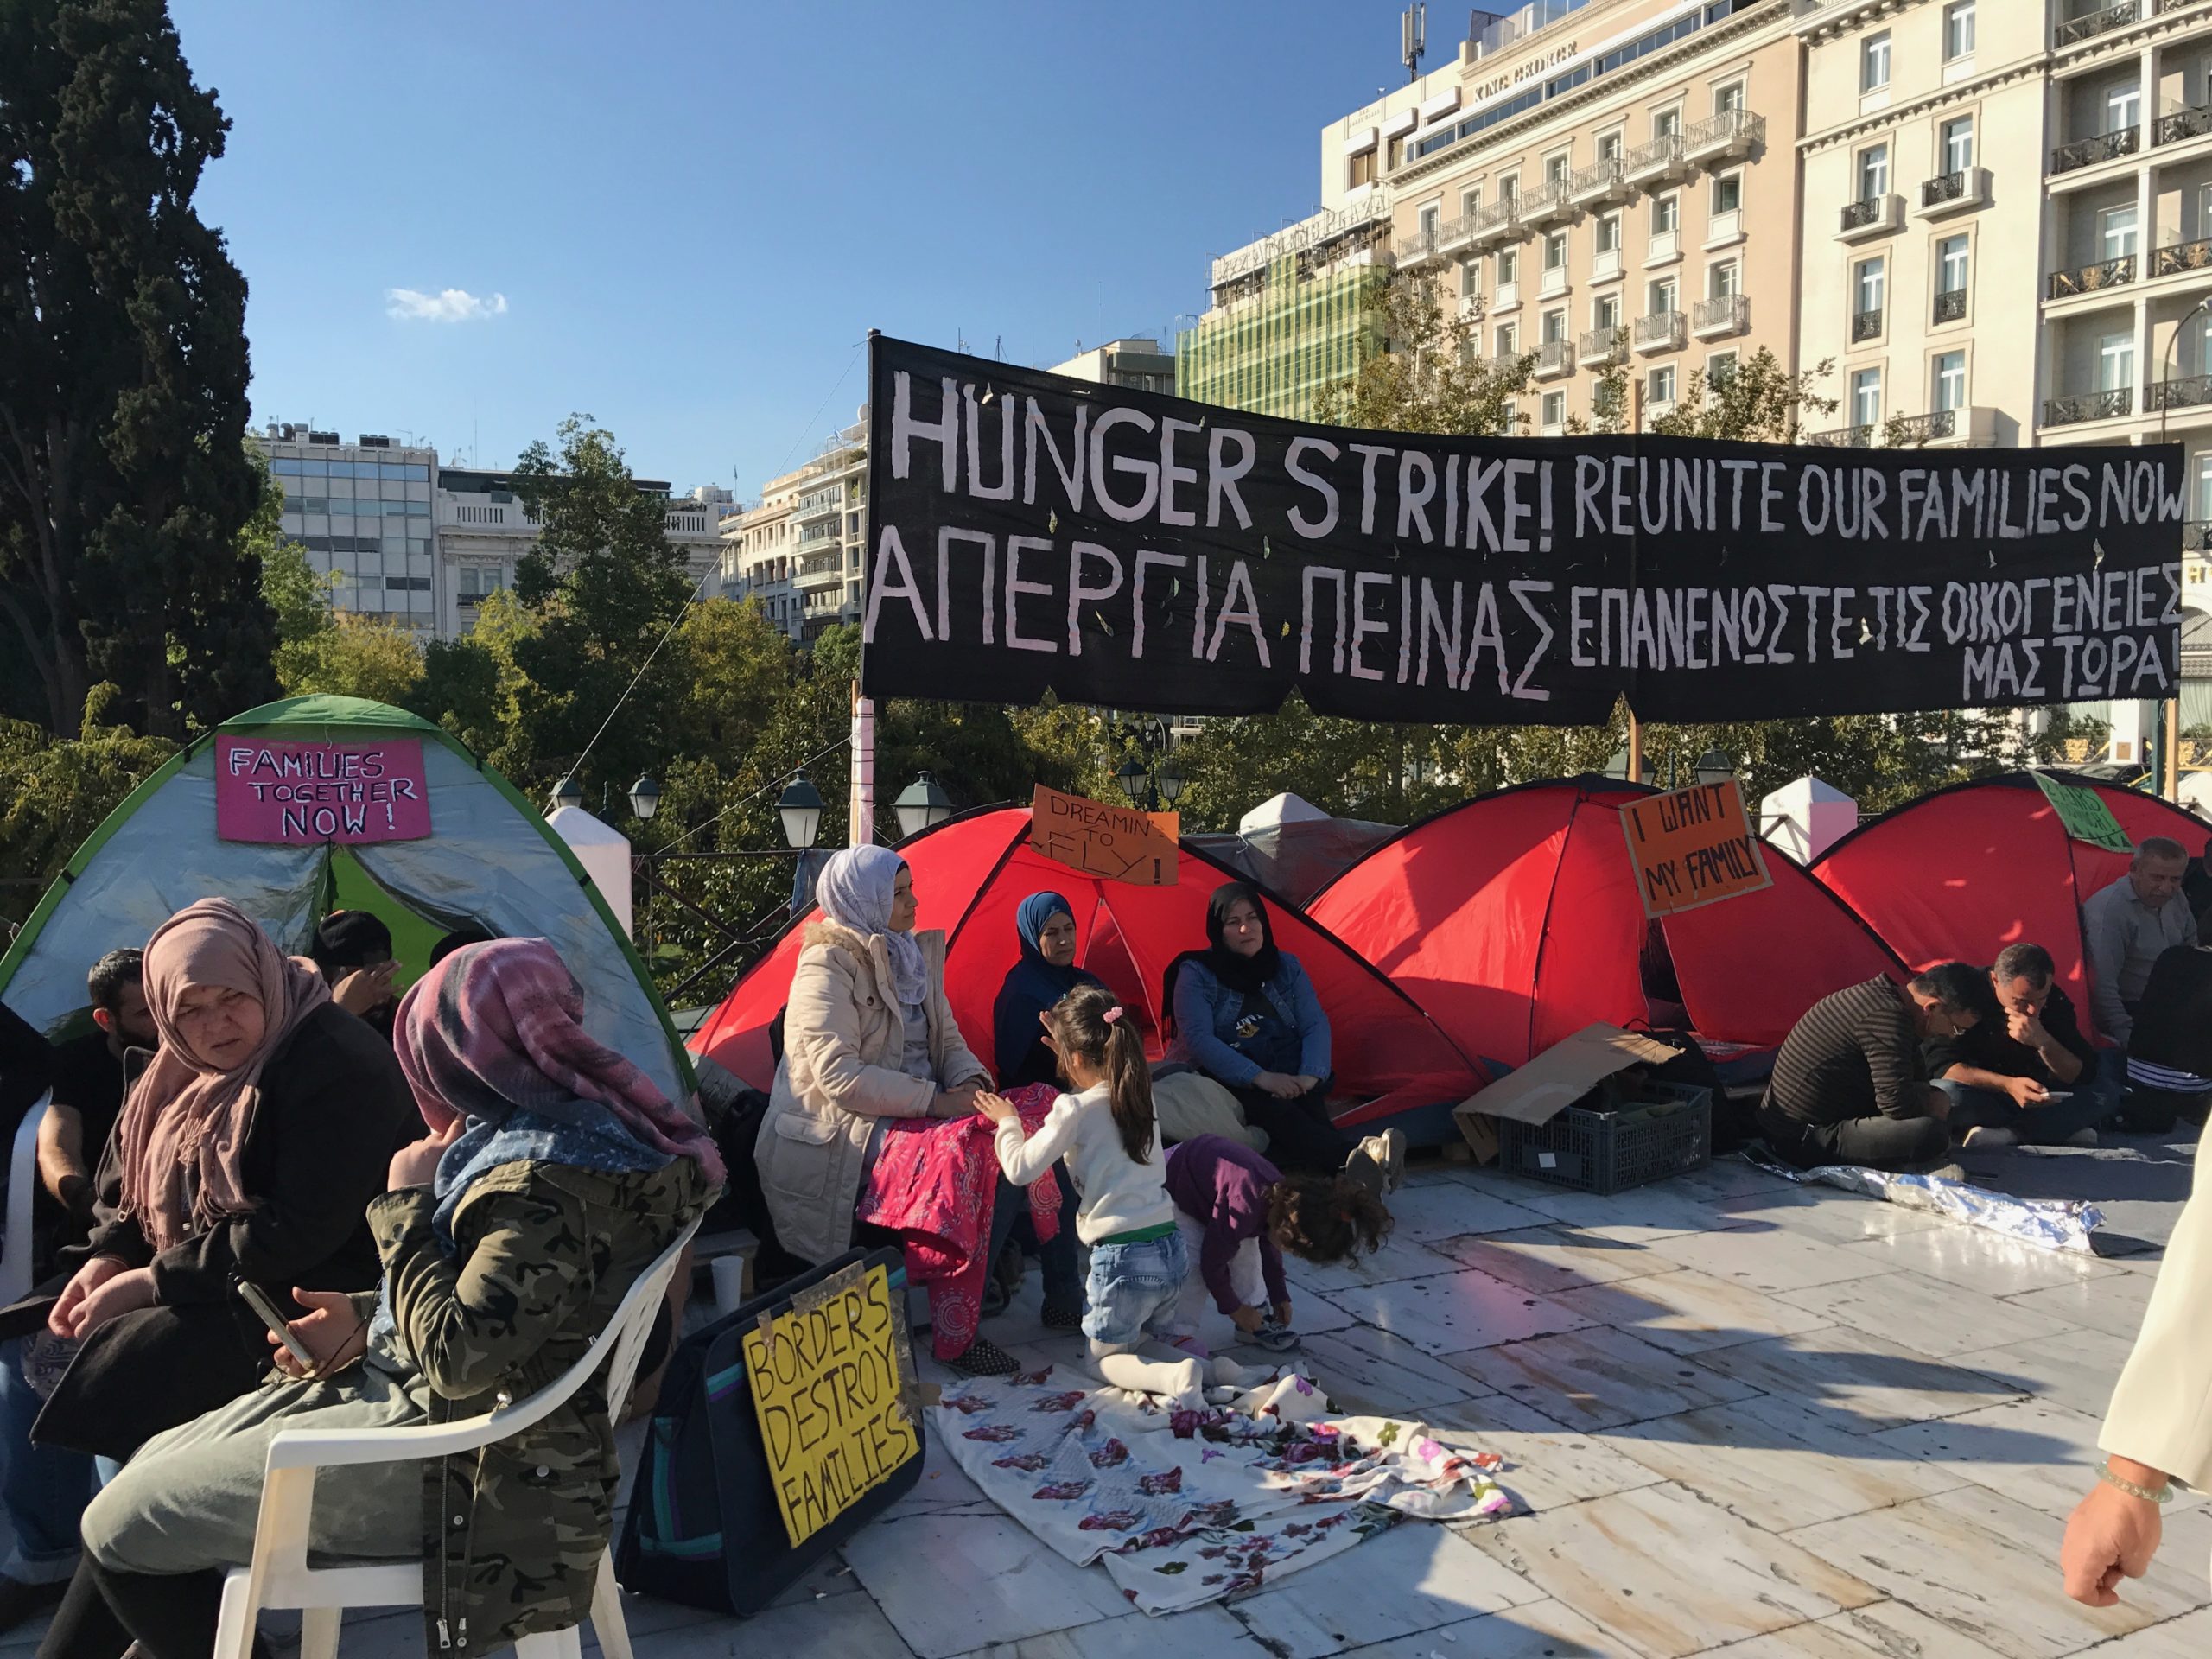 A photograph of the hunger strike of Syrian refugees in Athens, Greece during 2017.